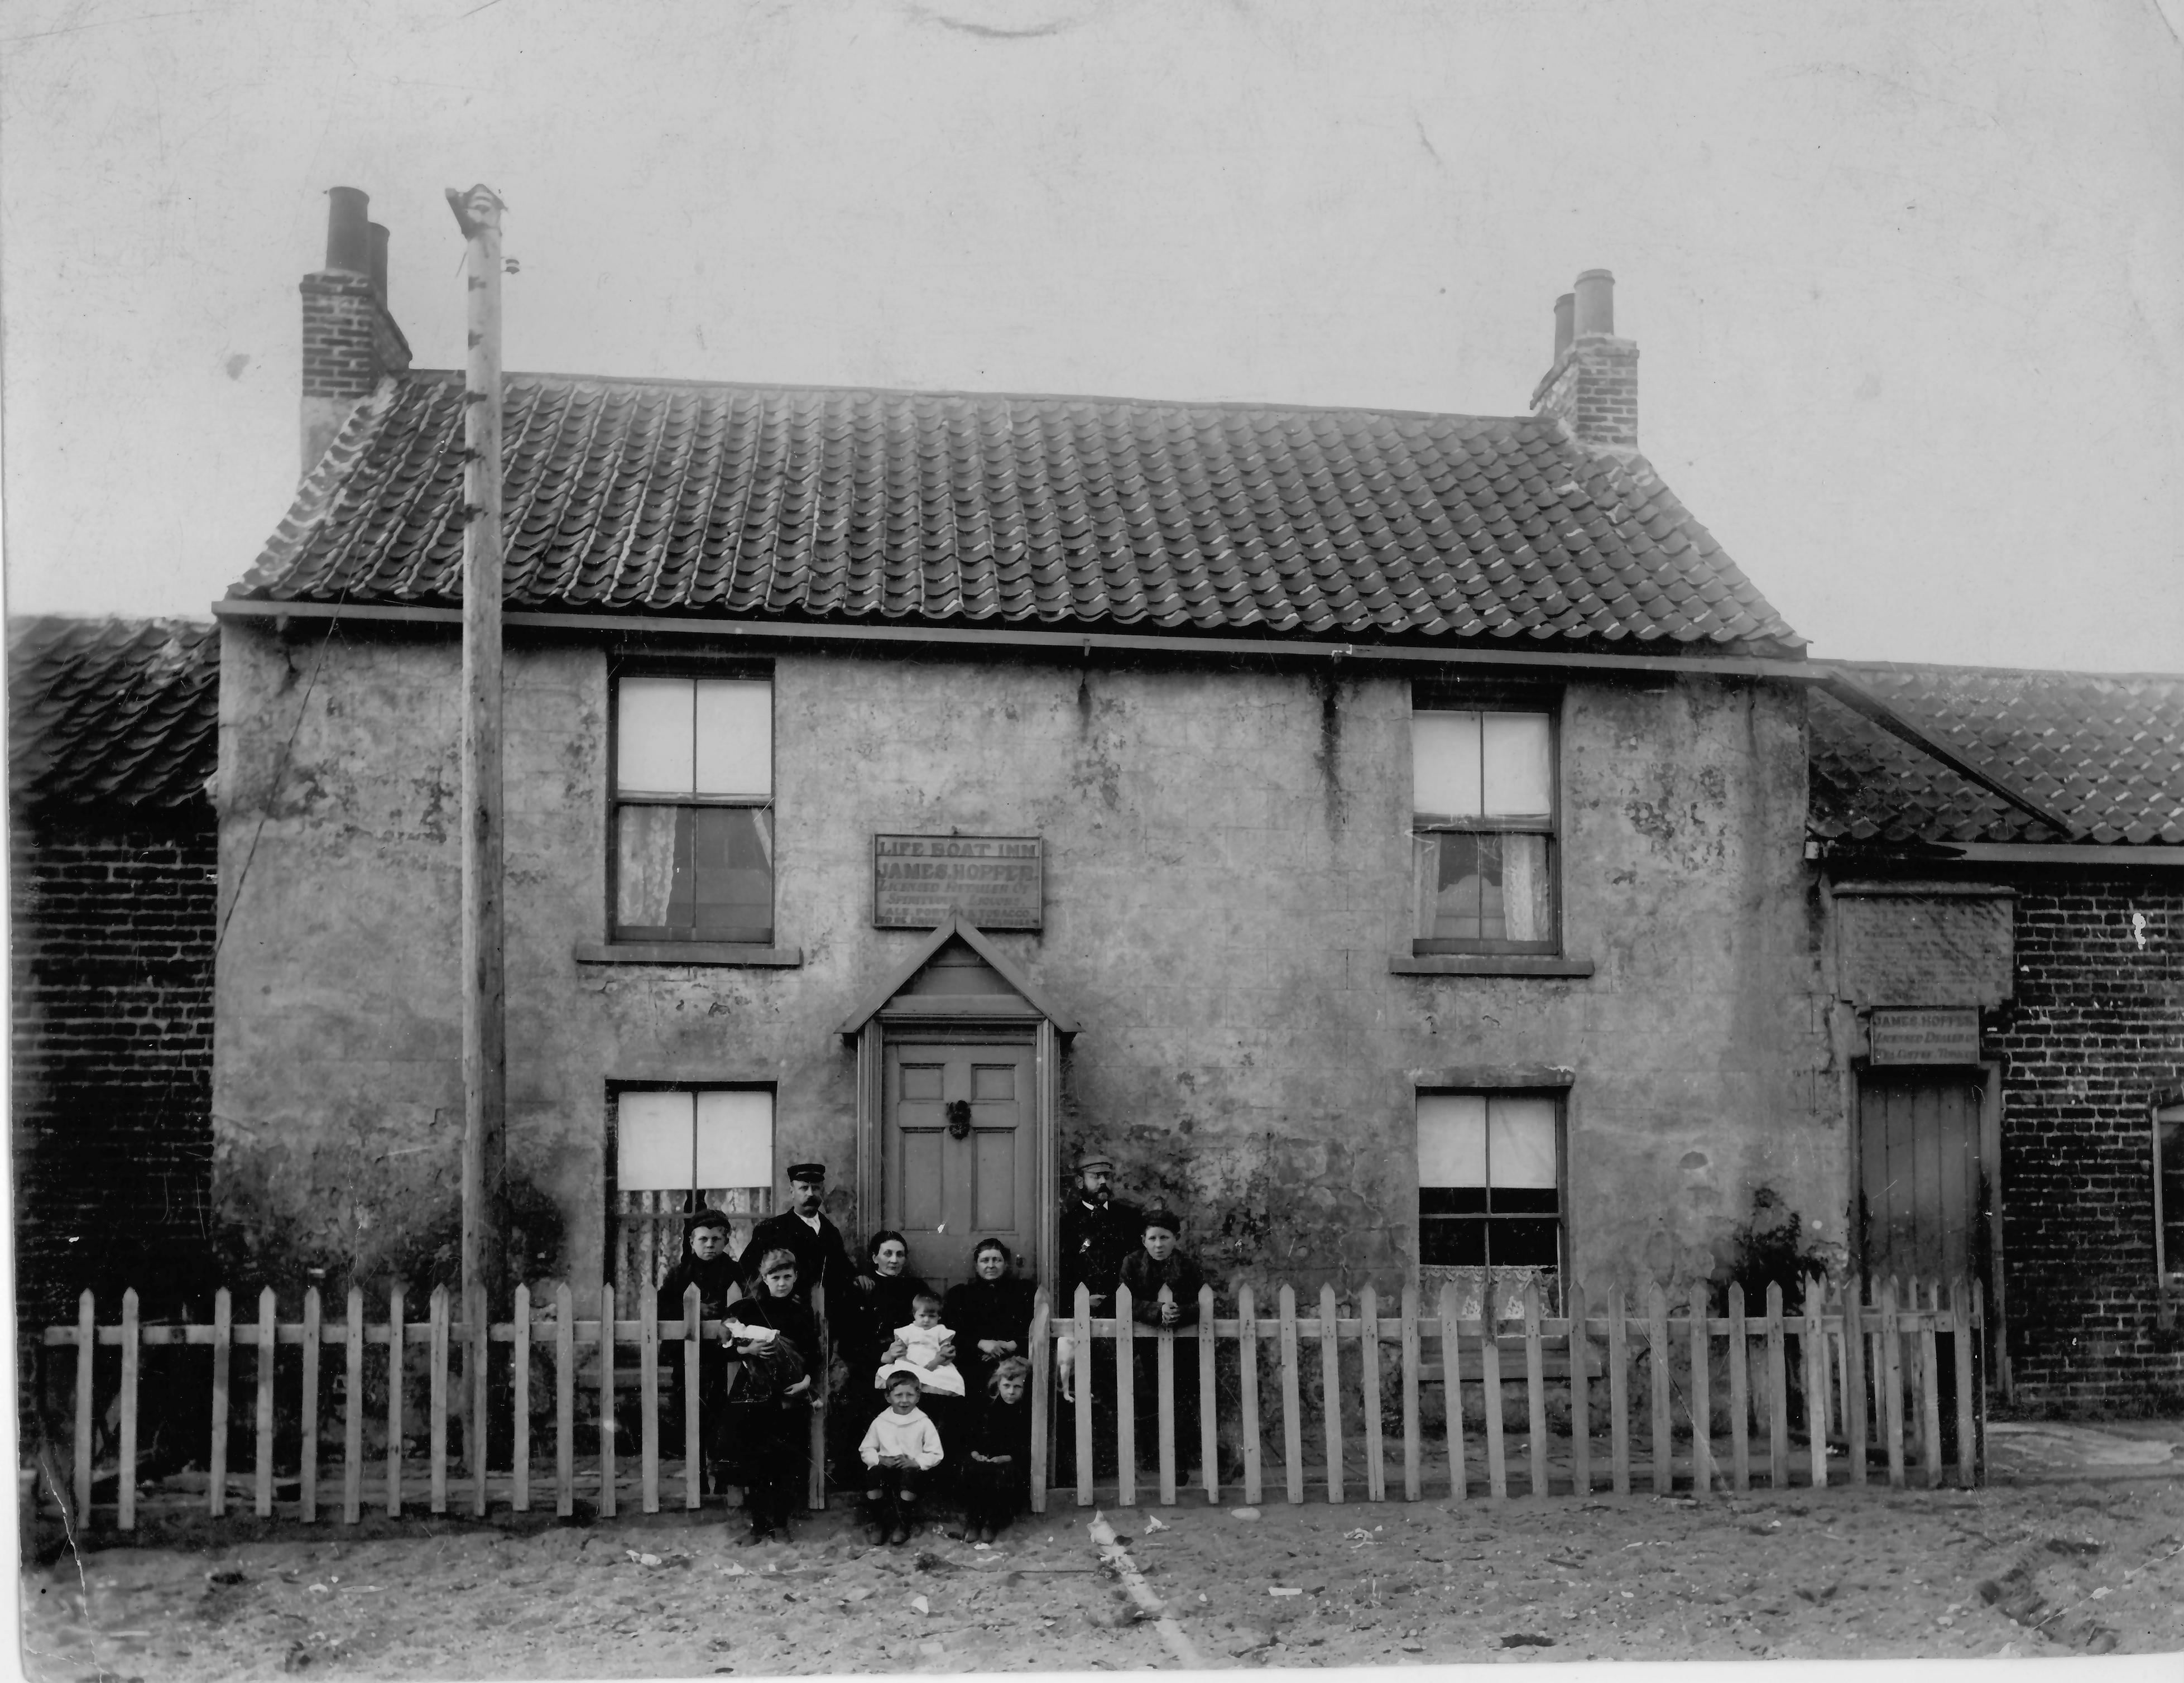 Lifeboat Inn and members of the Hopper family, c. 1900